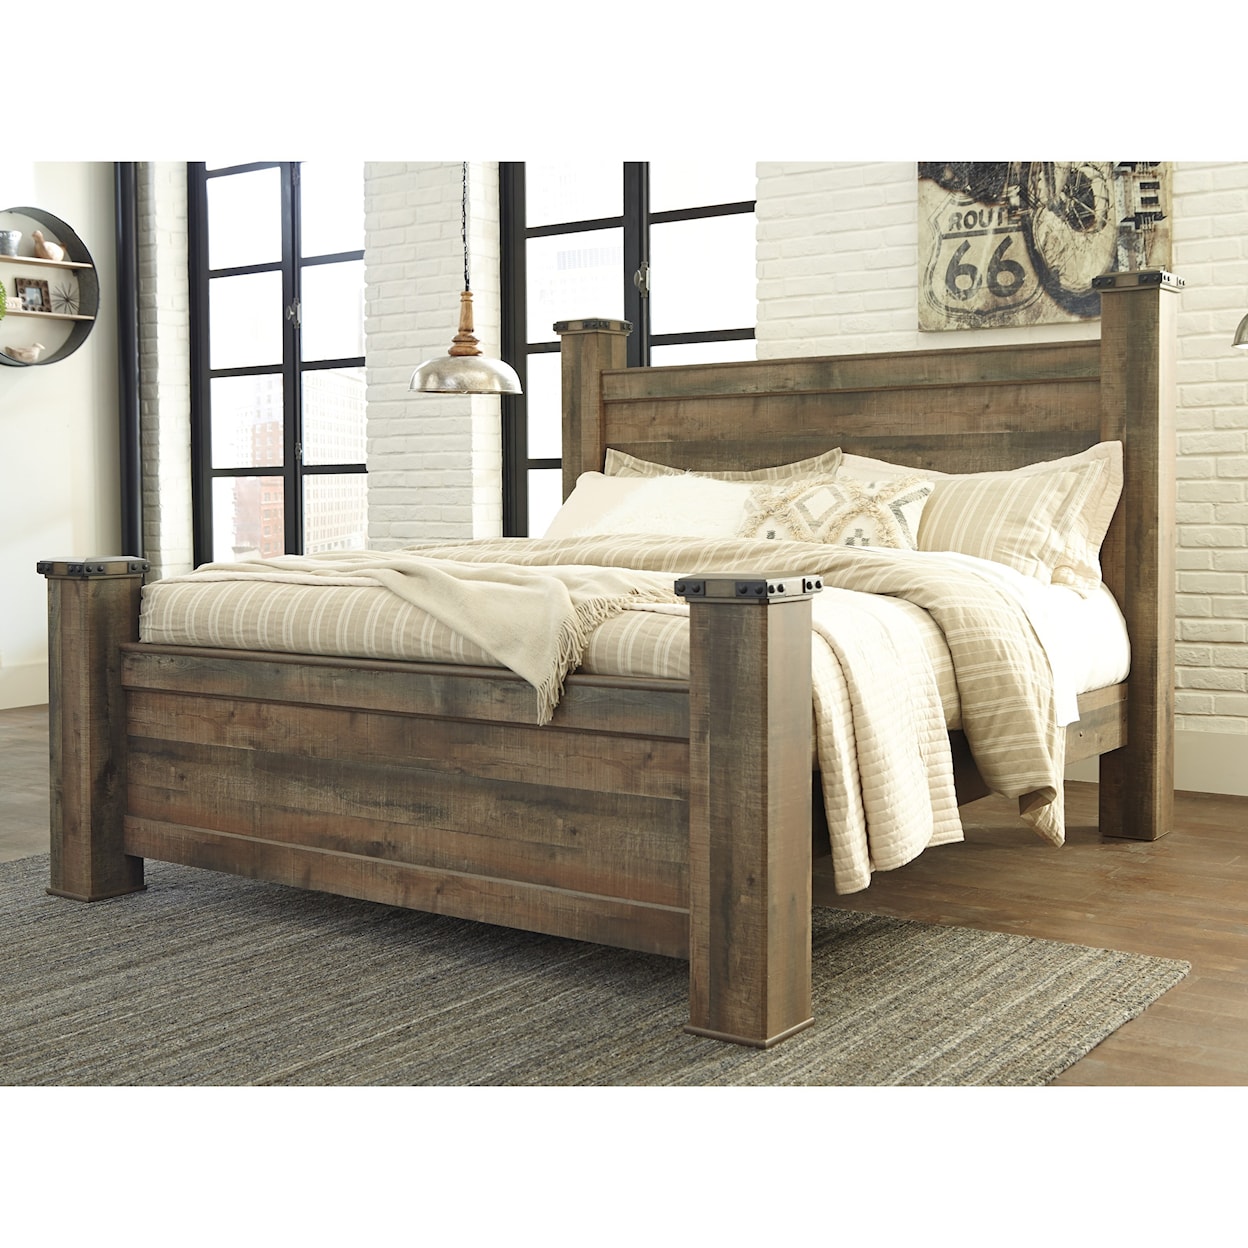 Ashley Furniture Signature Design Trinell King Poster Bed